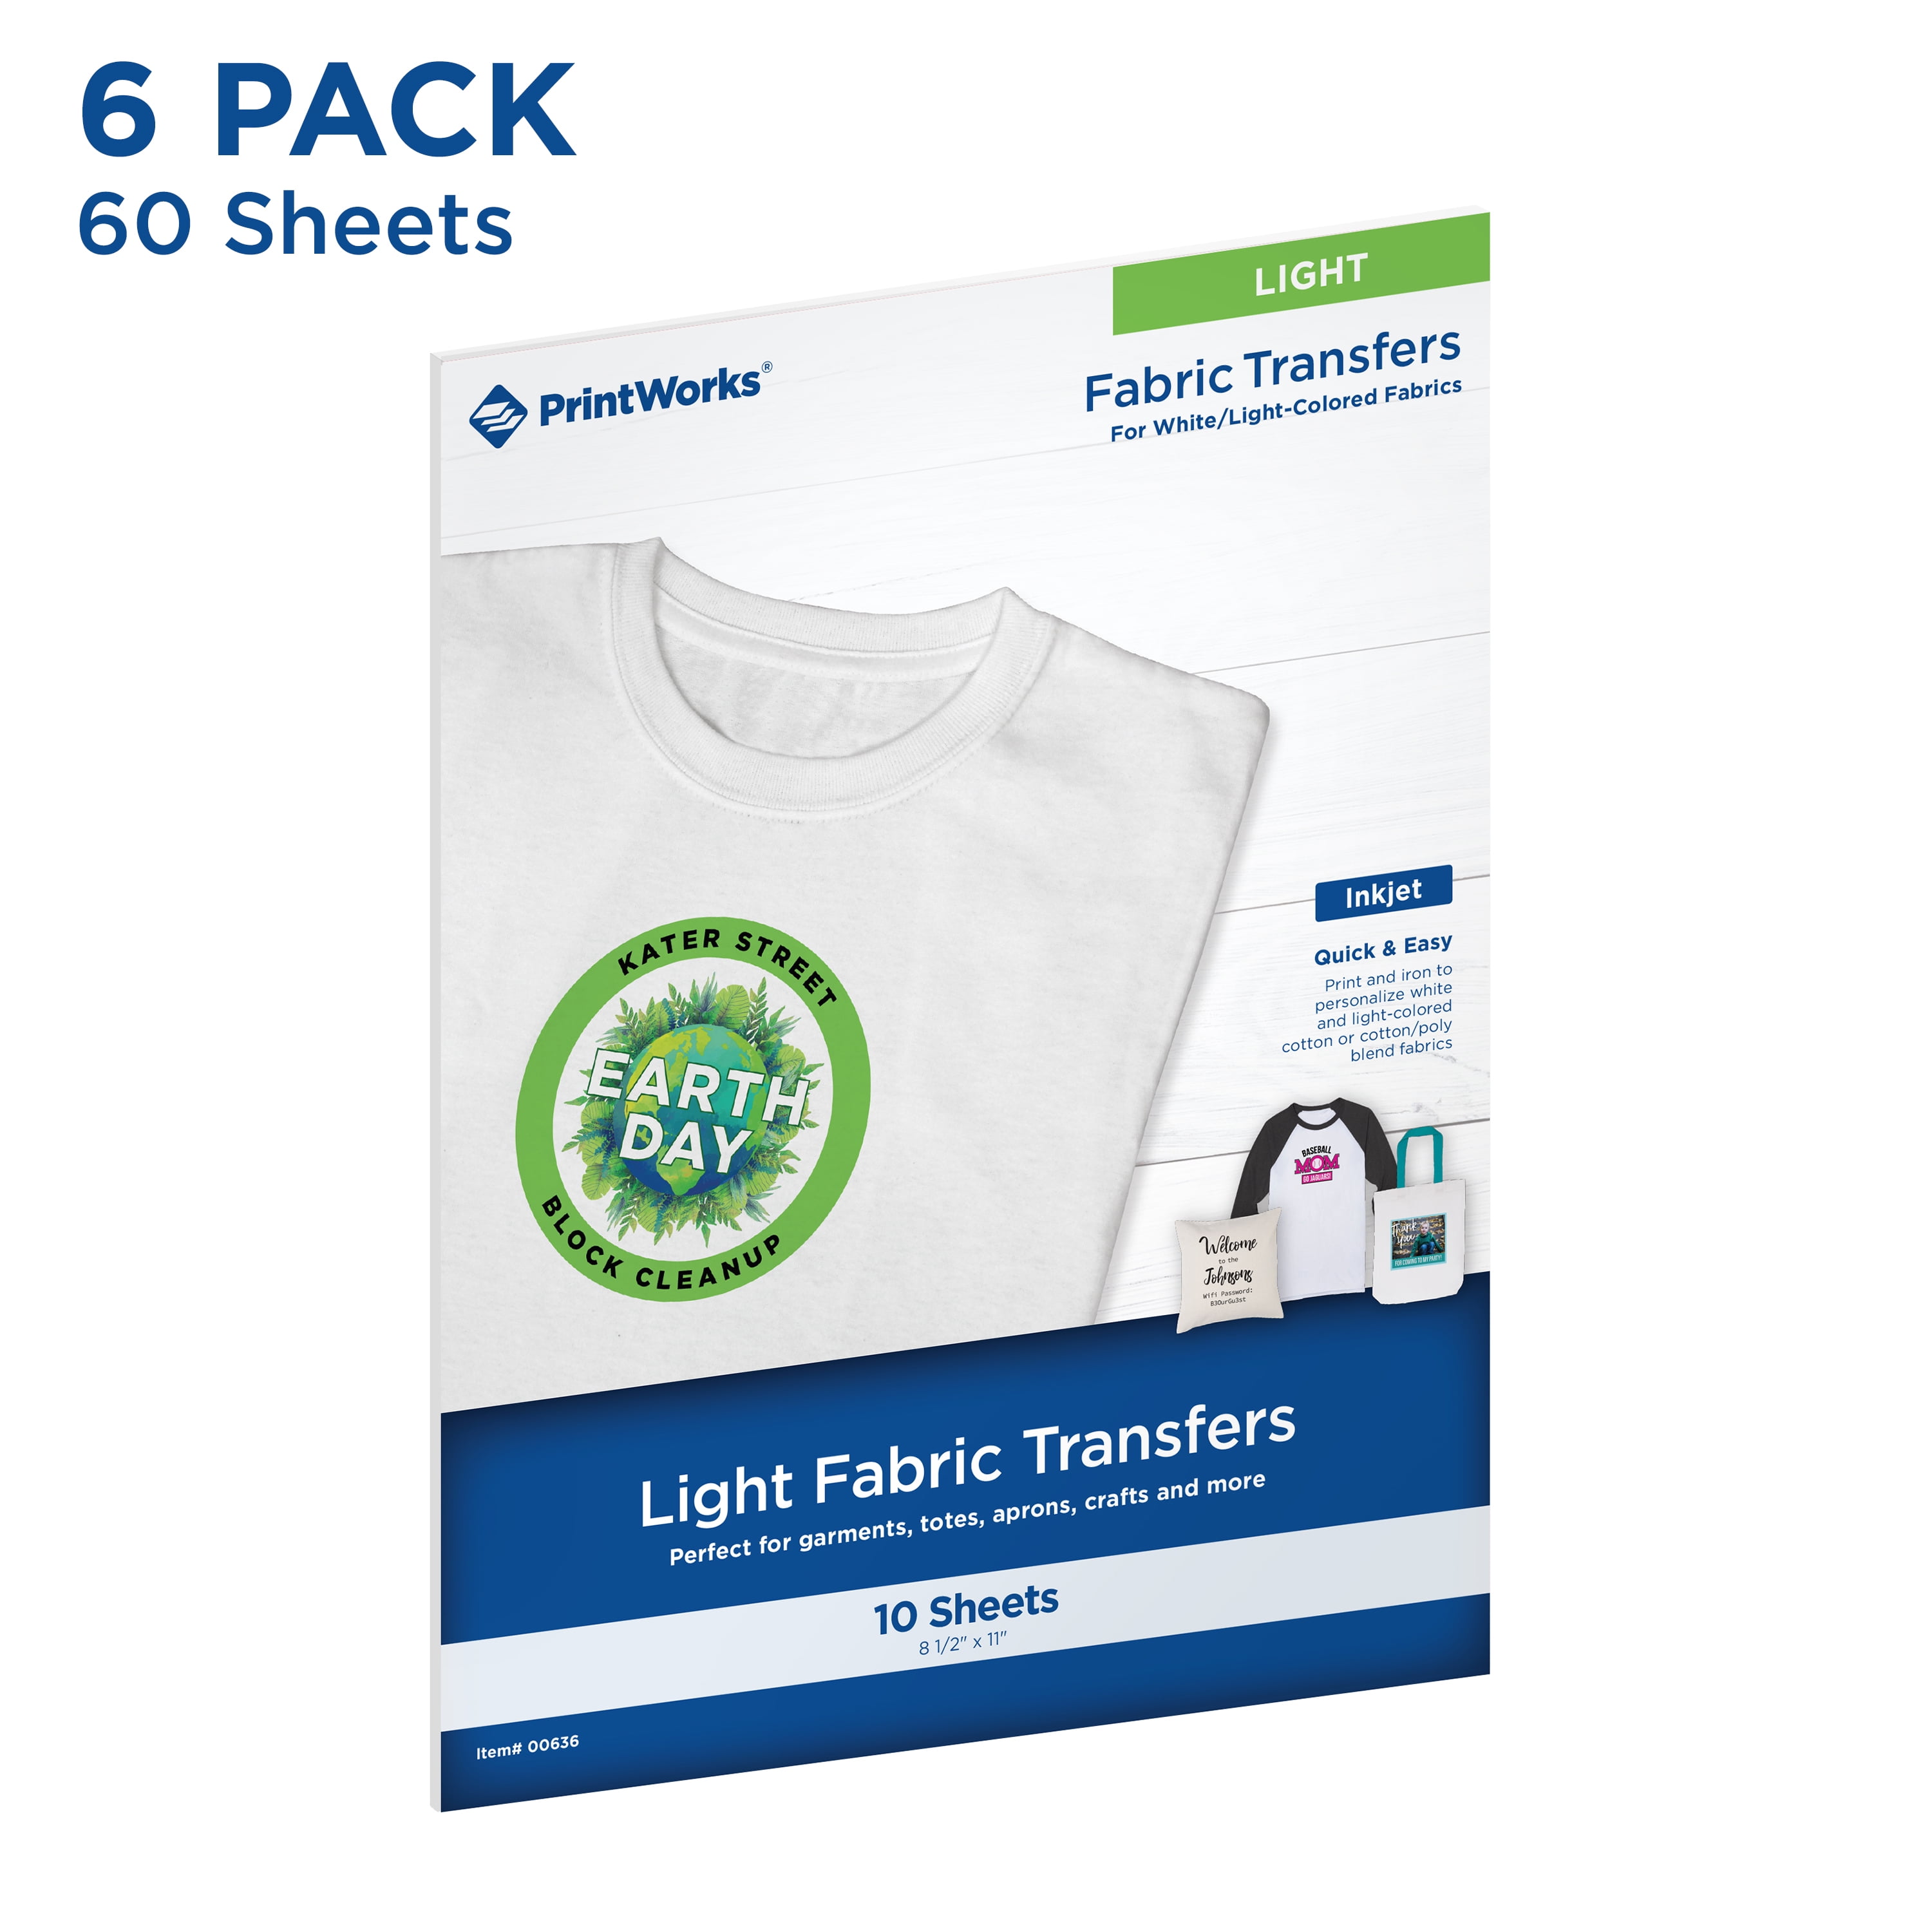 Difference Between a Light and a Dark Fabric Transfer by PrintWorks